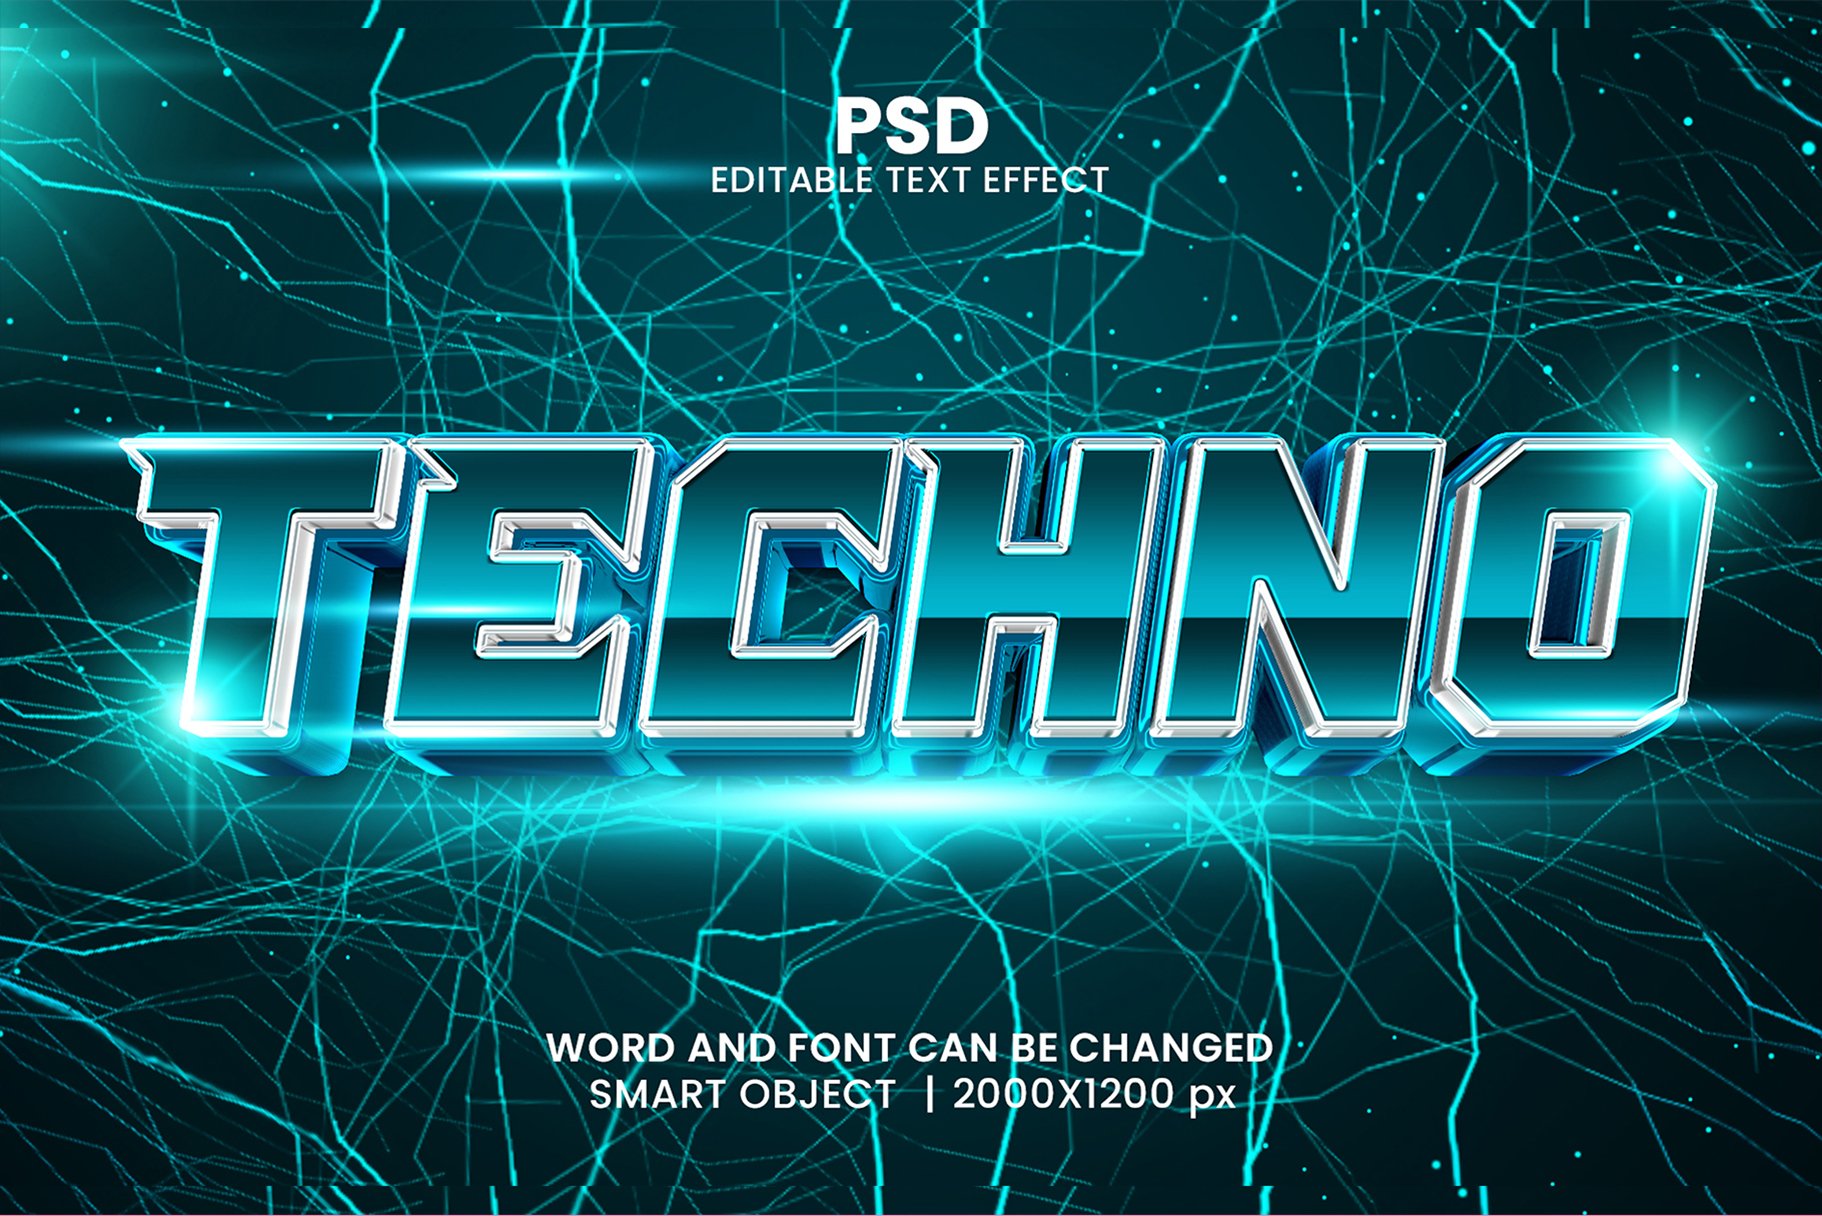 Techno 3d Text Effect Style PSDcover image.